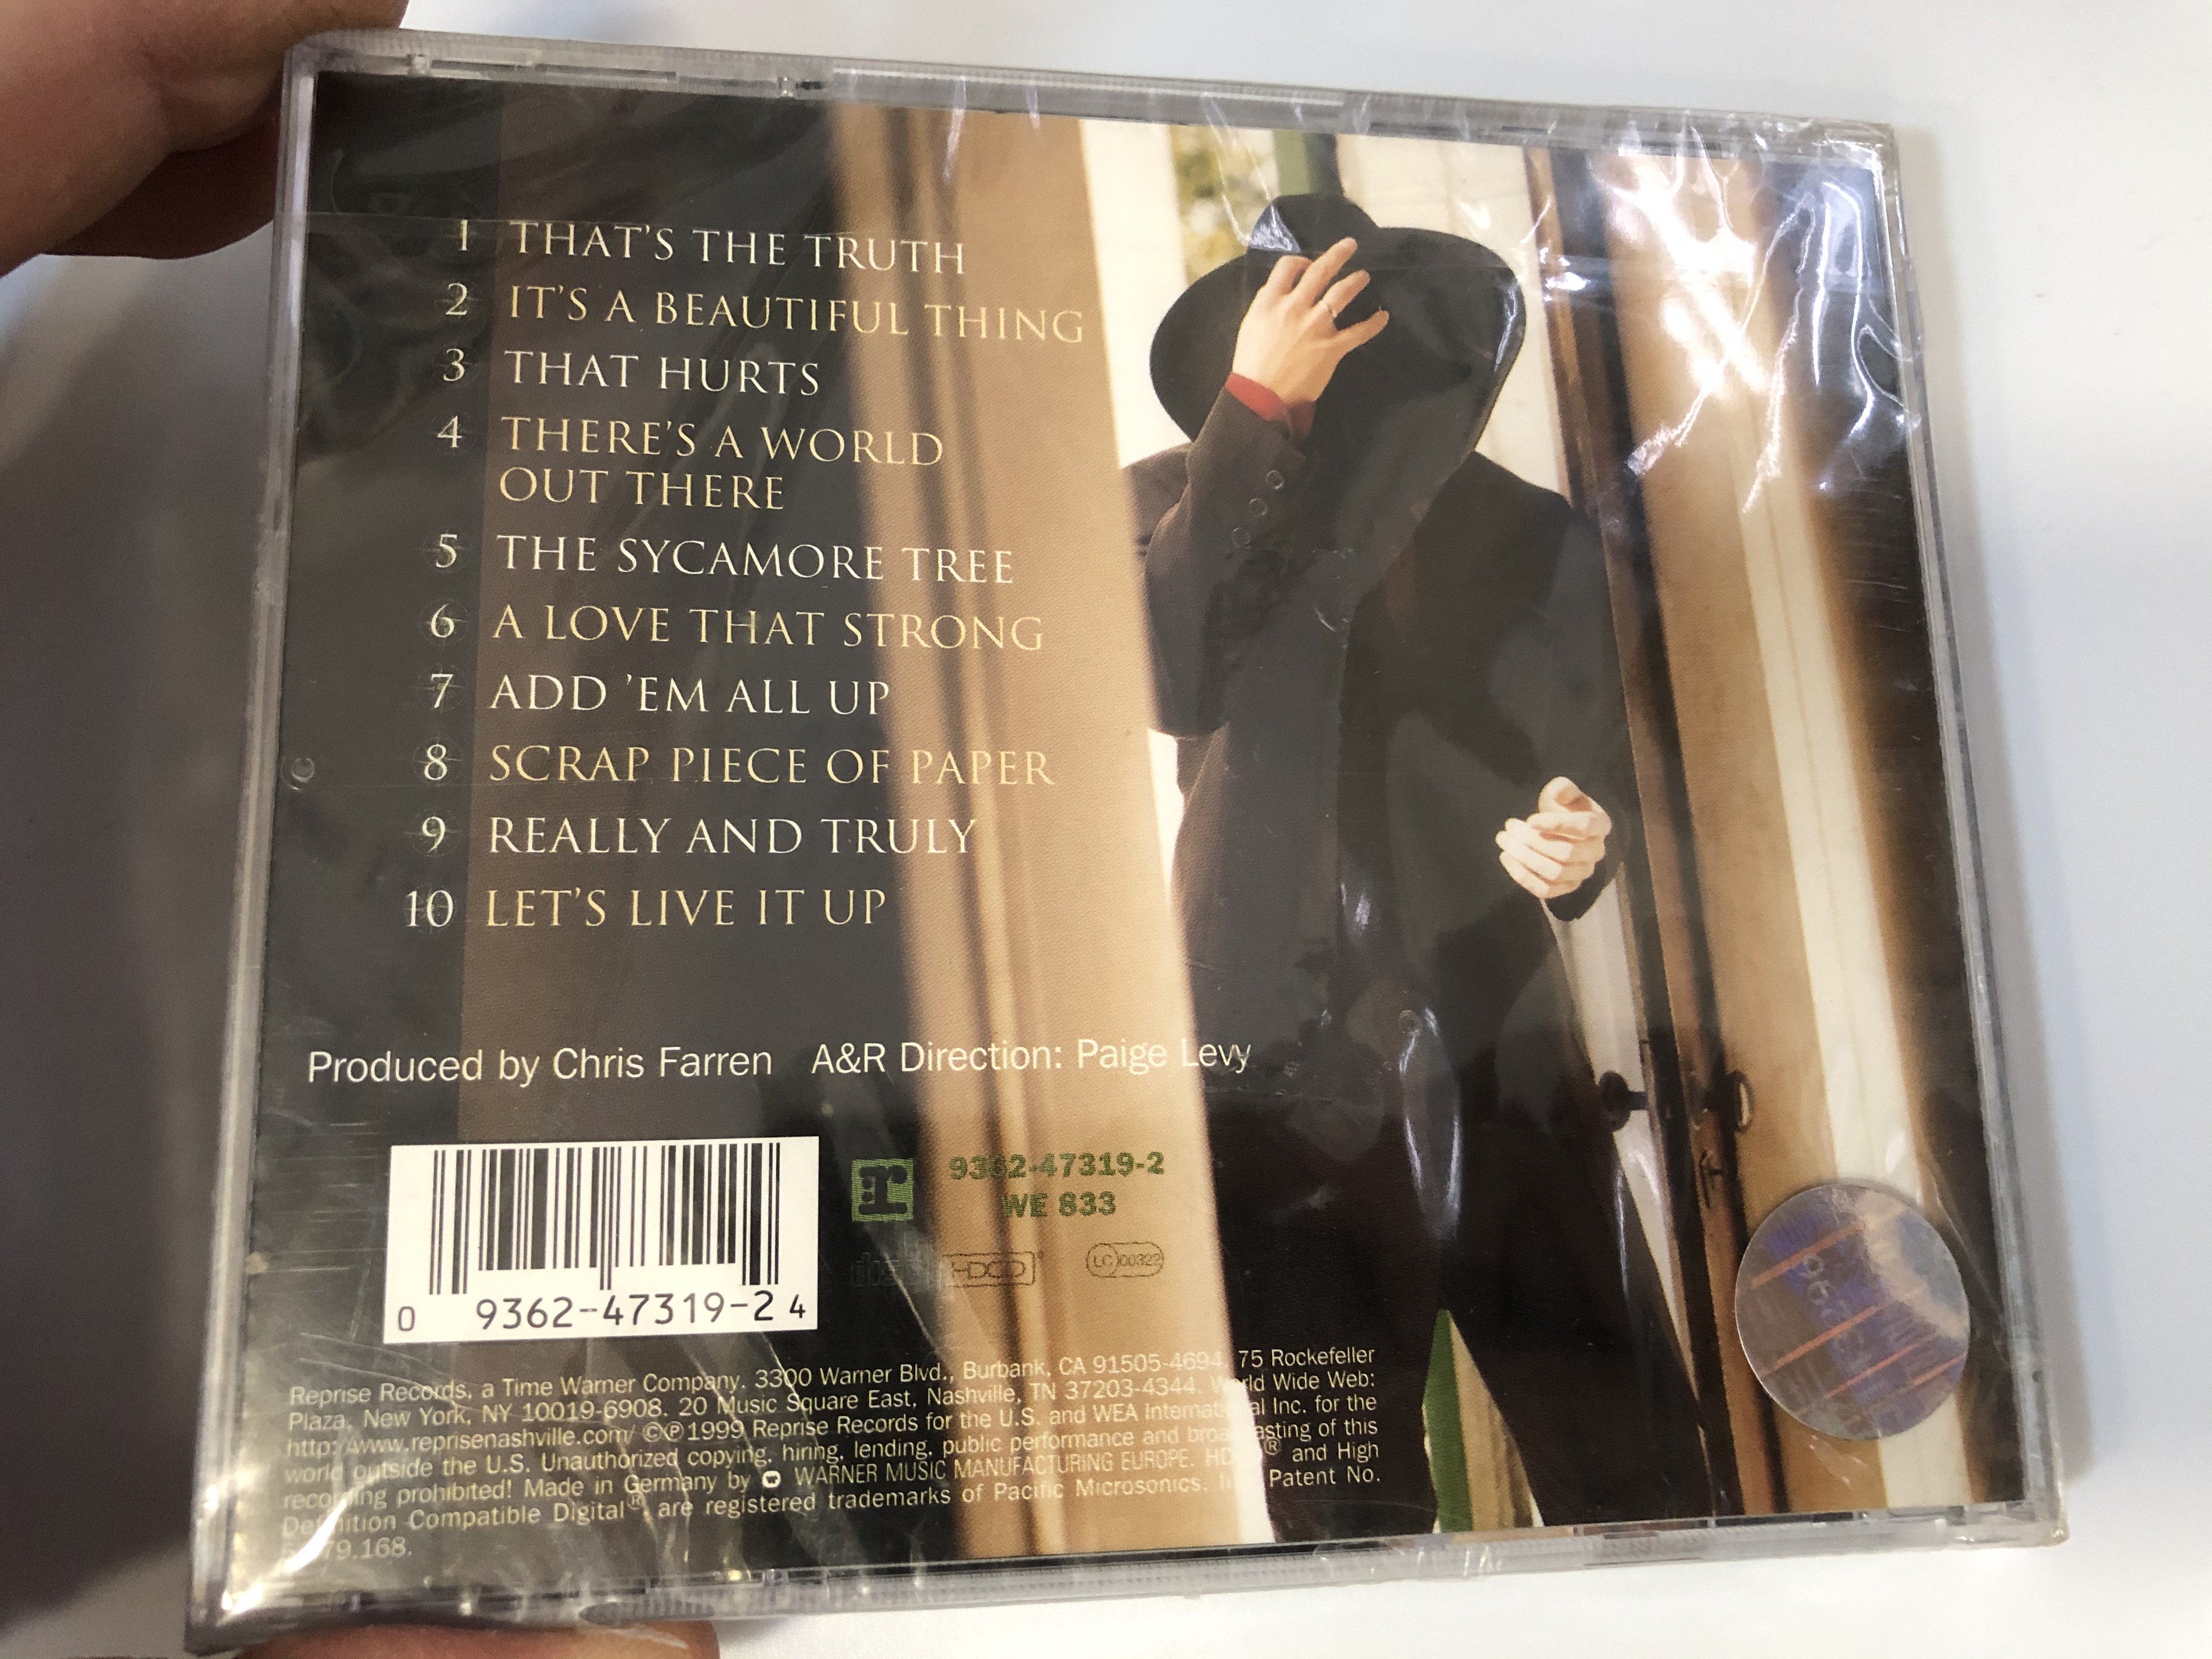 paul-brandt-that-s-the-truth-reprise-records-audio-cd-1999-9362-47319-2-2-.jpg